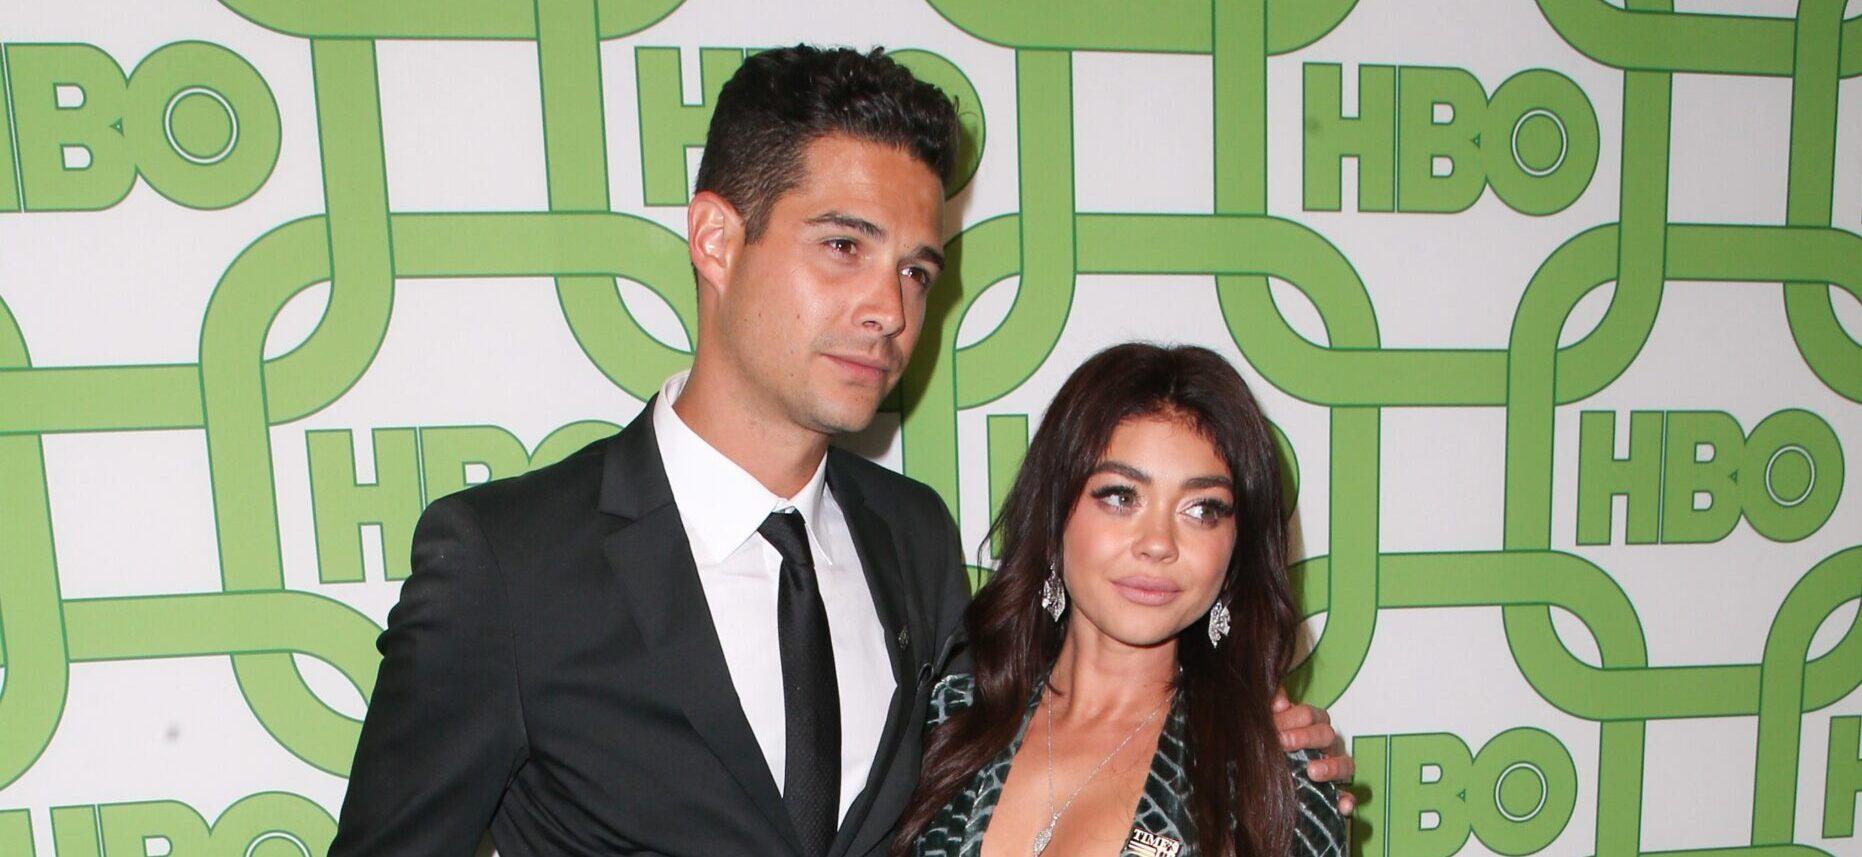 Sarah Hyland and Wells Adams at HBO's Official Golden Globe Awards After Party - Arrivals